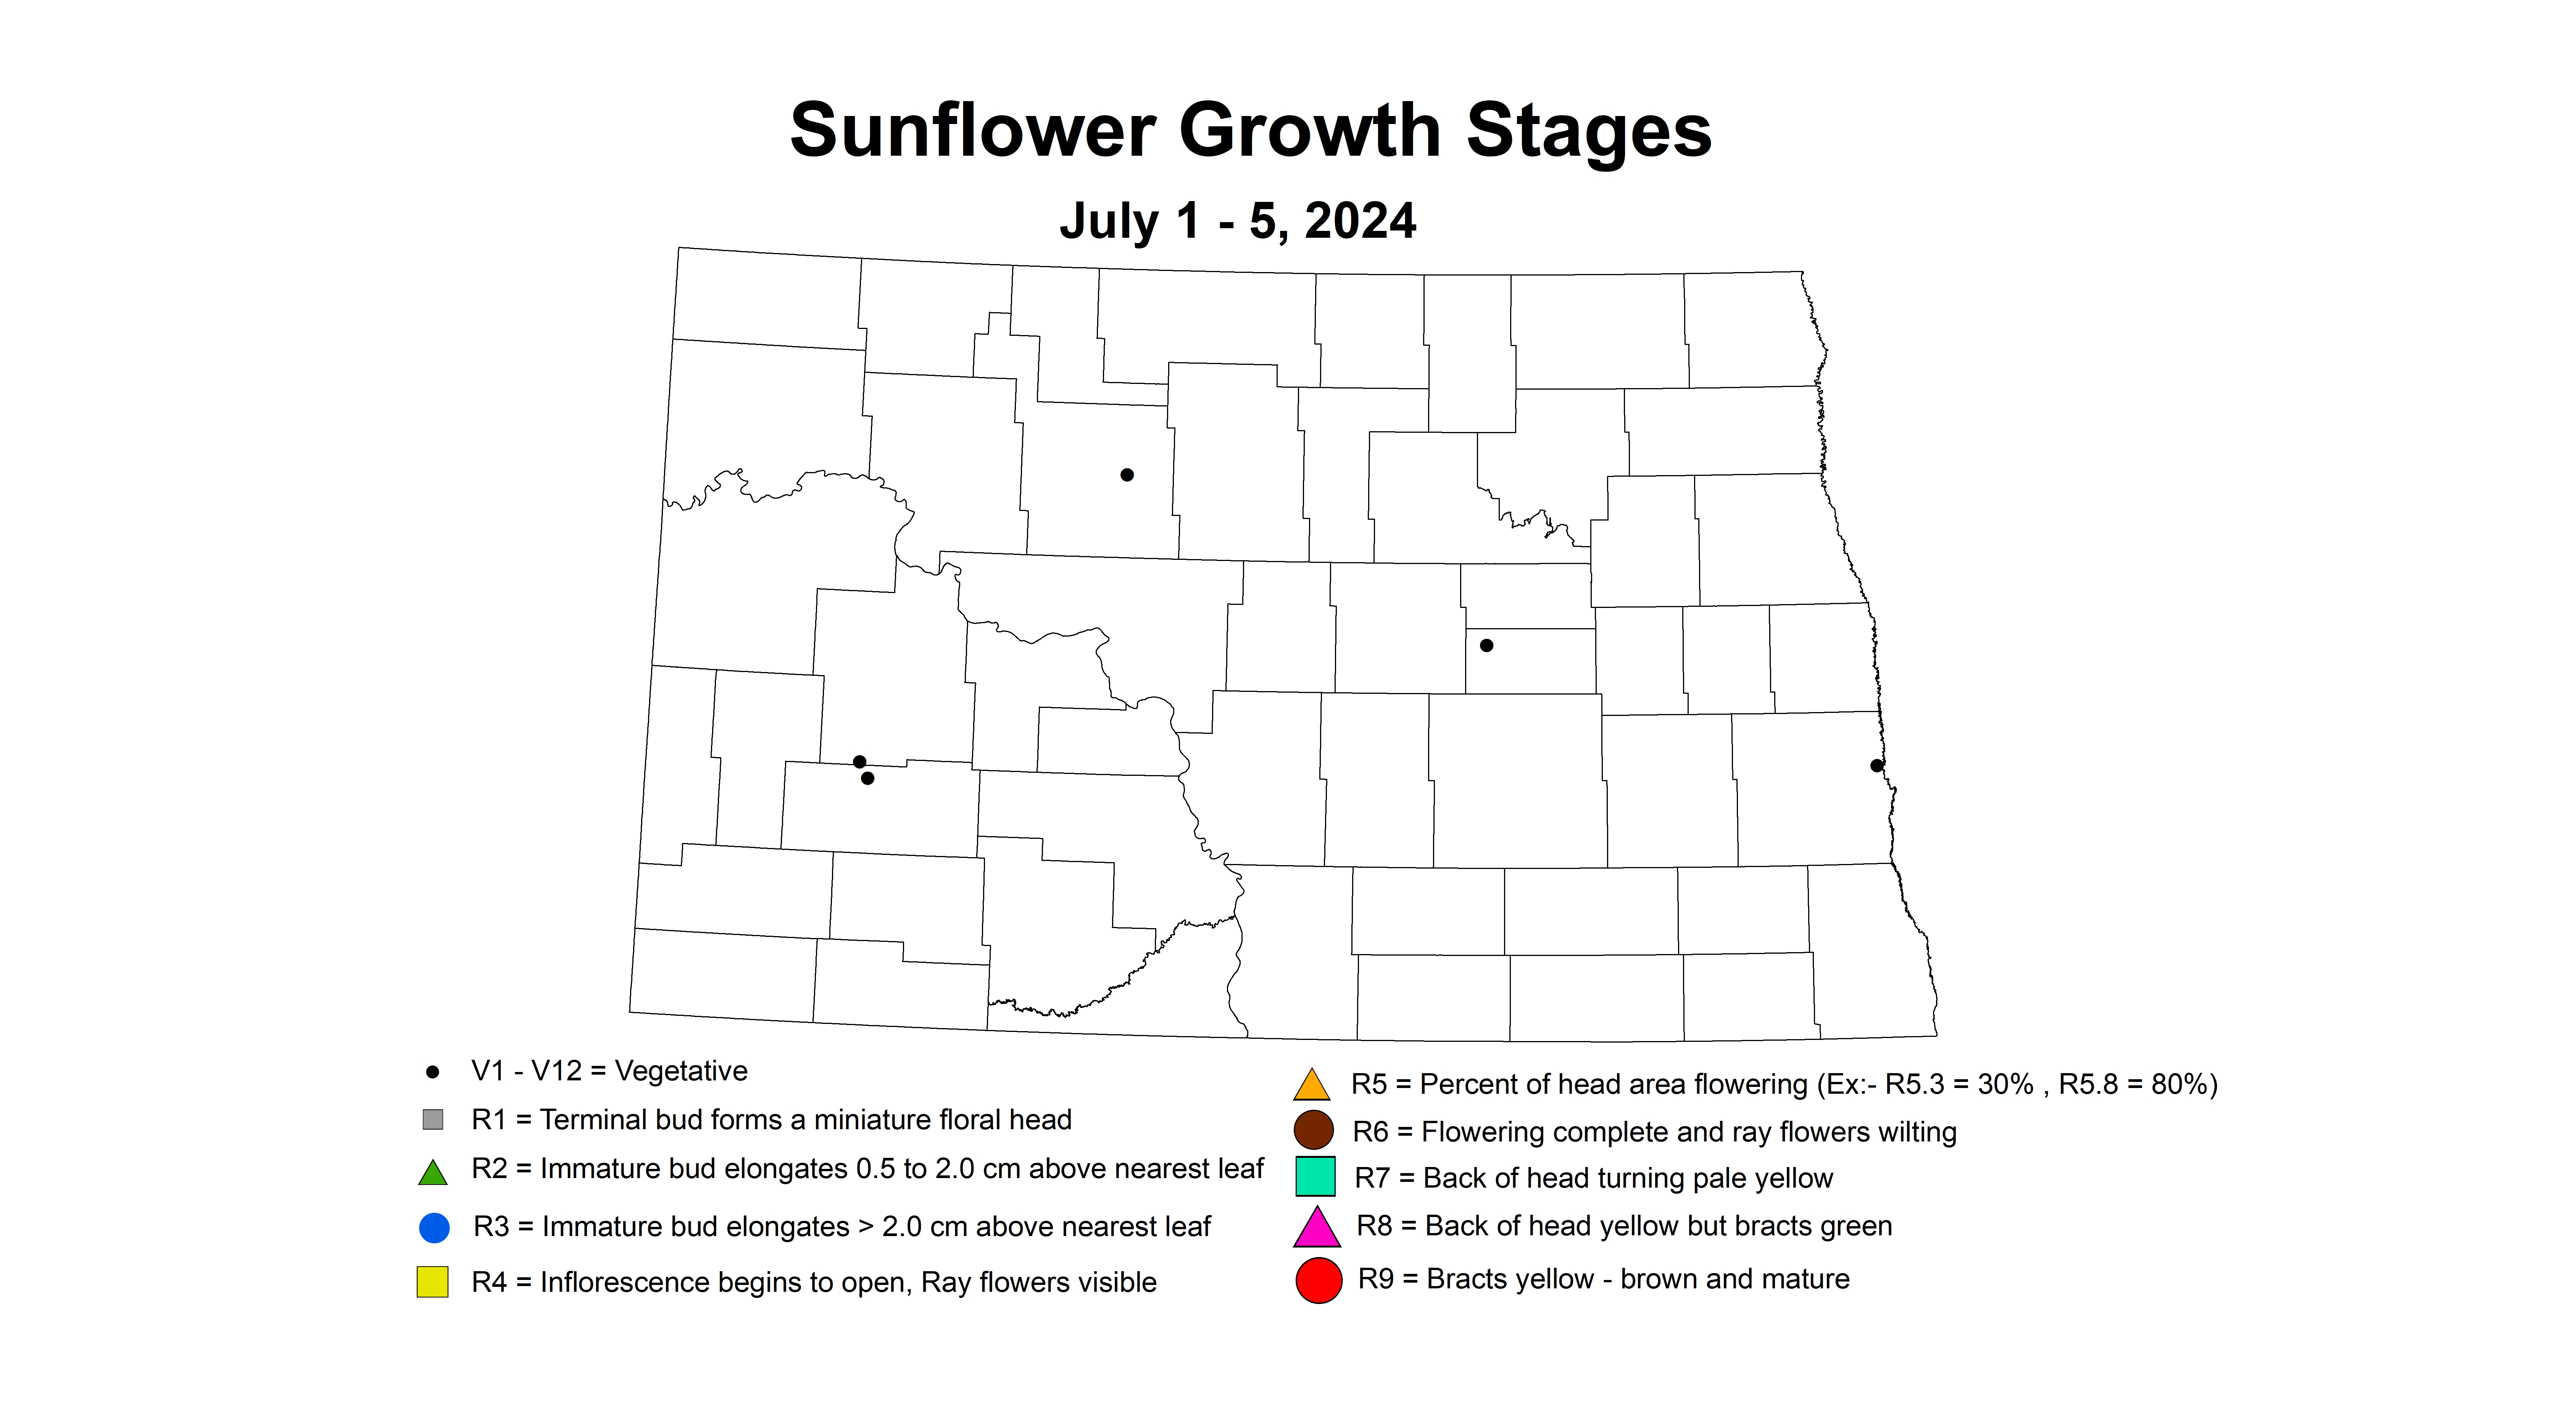 sunflower growth stages July 1 - 5 2024